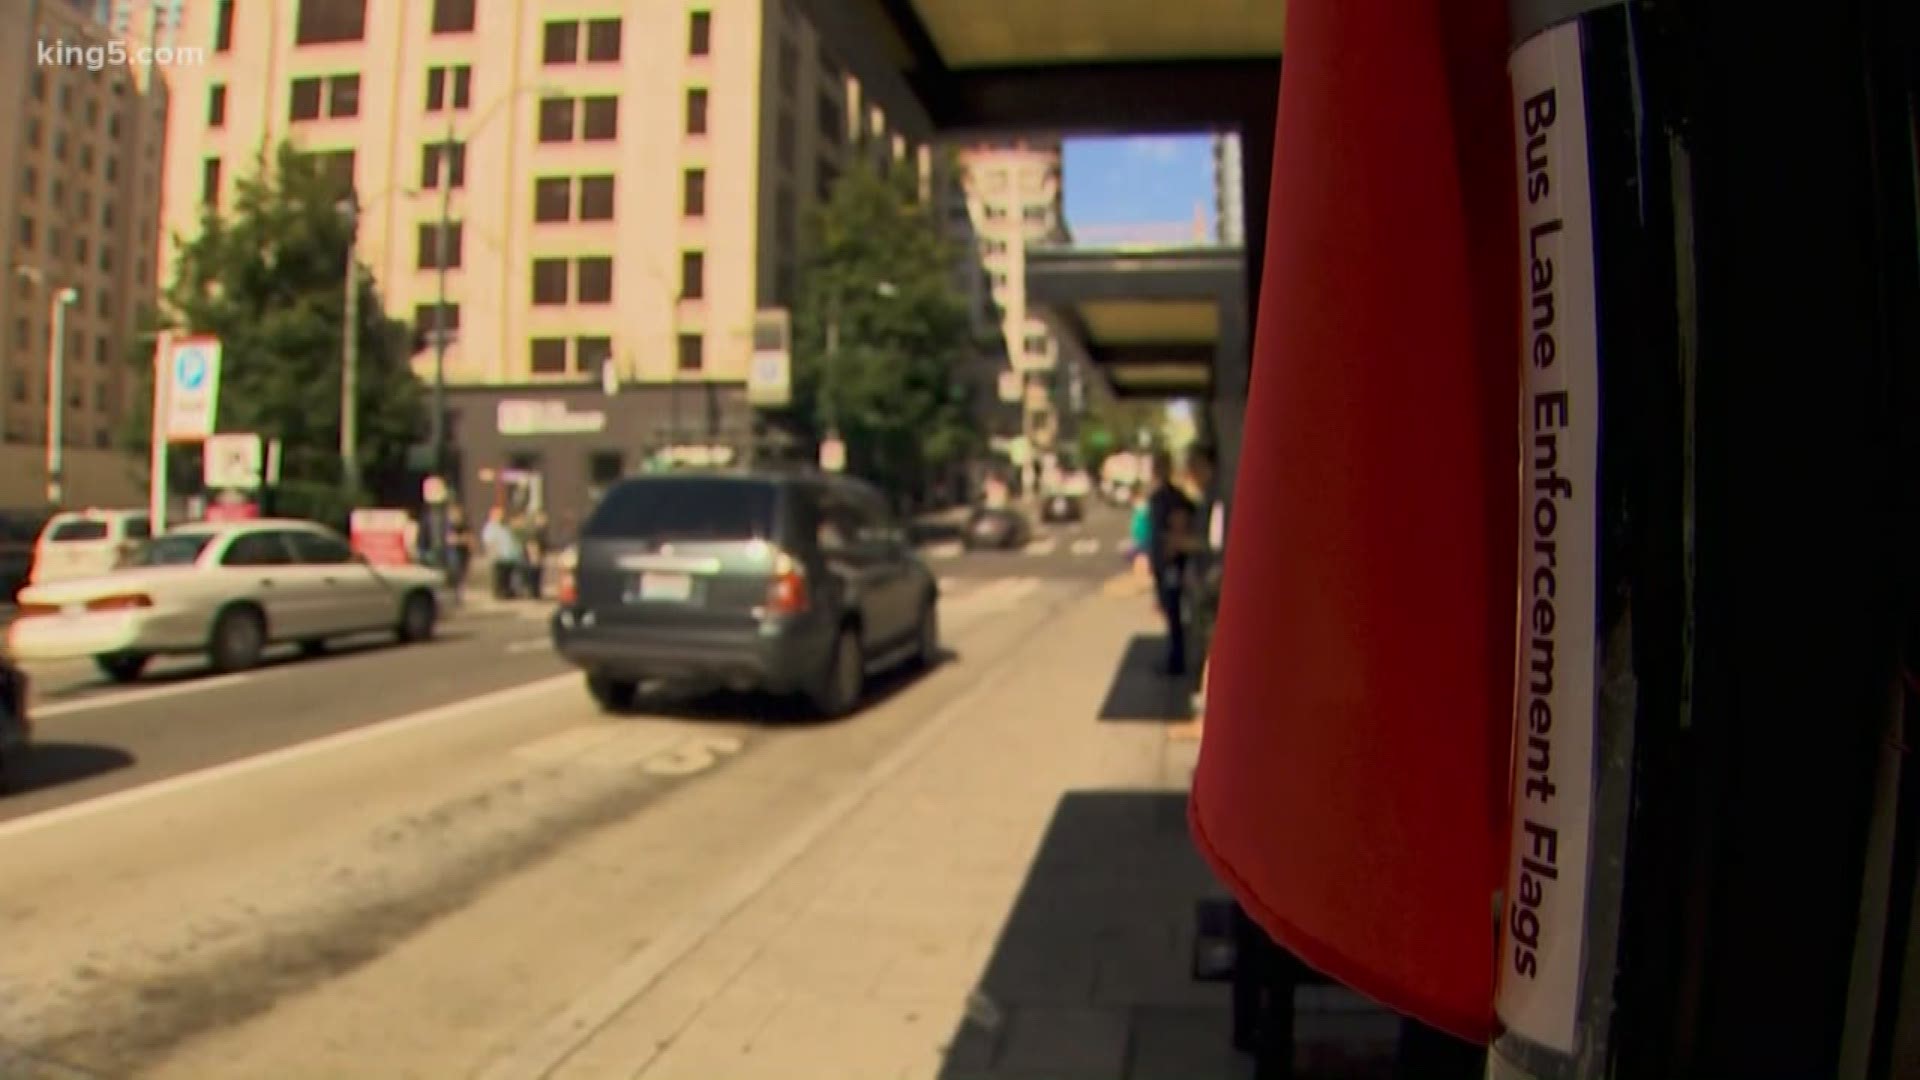 Drivers who cut into the bus-only lanes continue to frustrate transit riders, so much so, Seattle riders are taking it into their own hands to help make sure drivers stay in their lane.